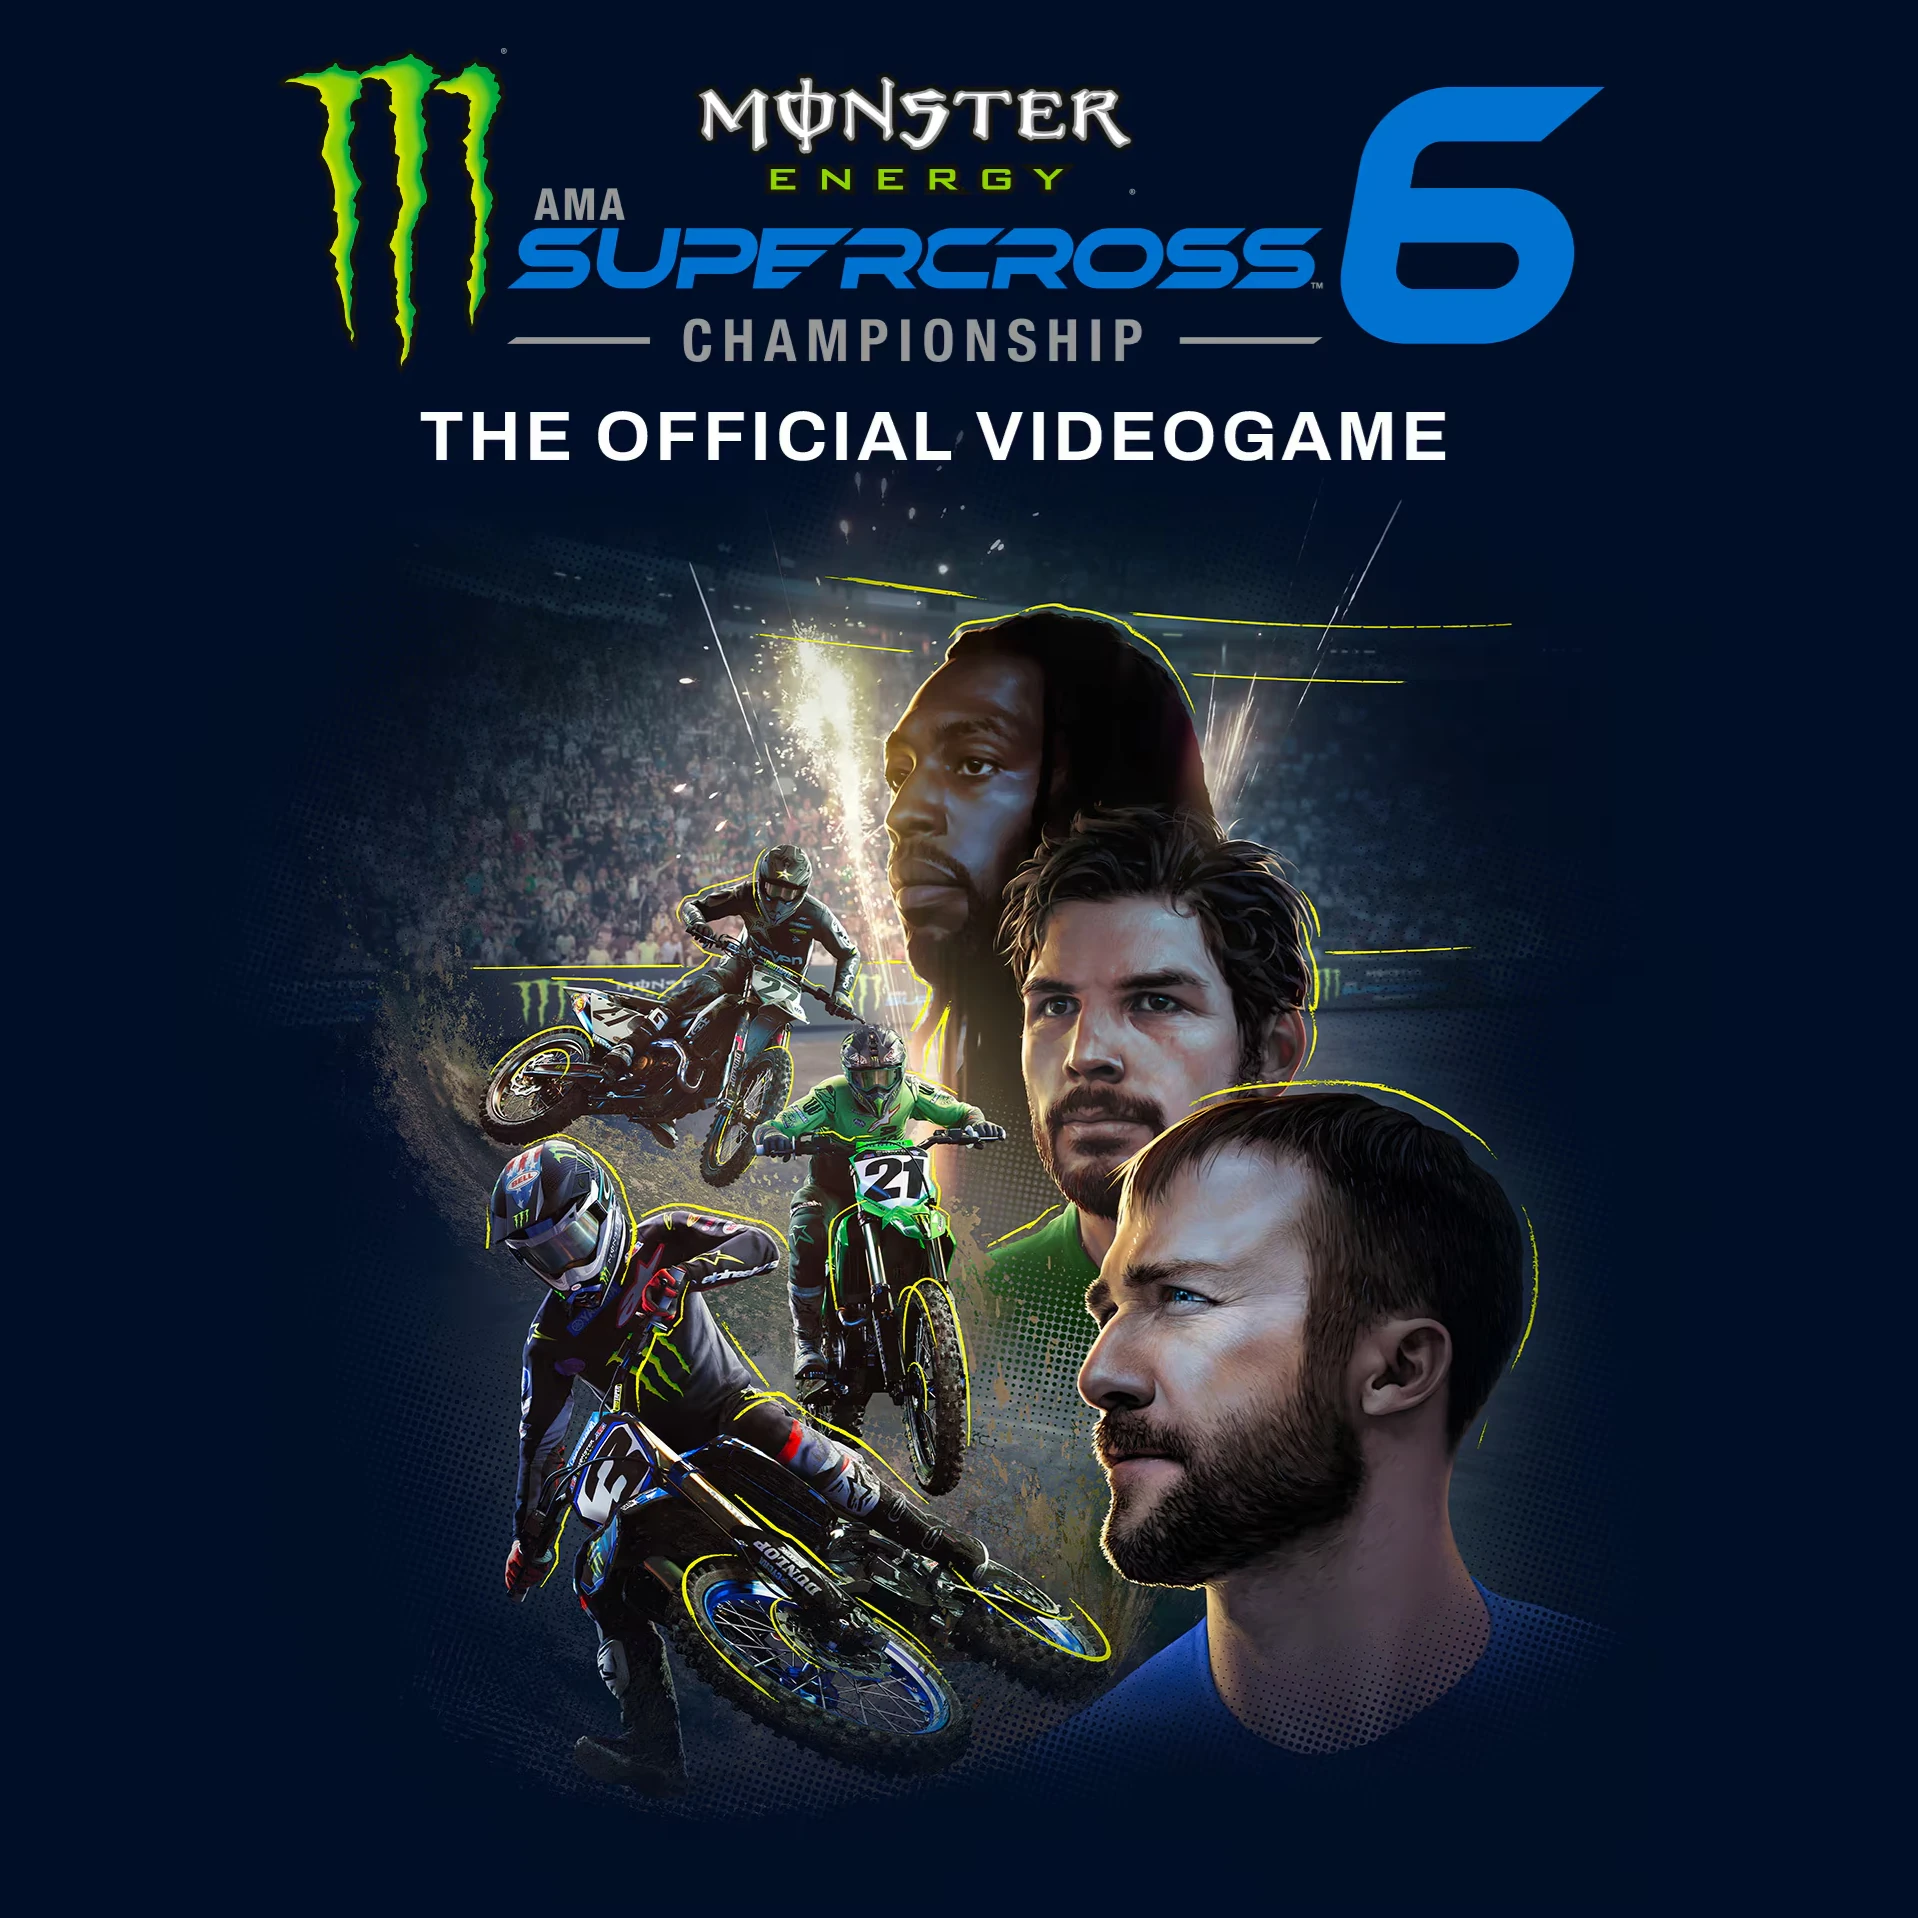 Monster Energy Supercross 6 - The Official Videogame